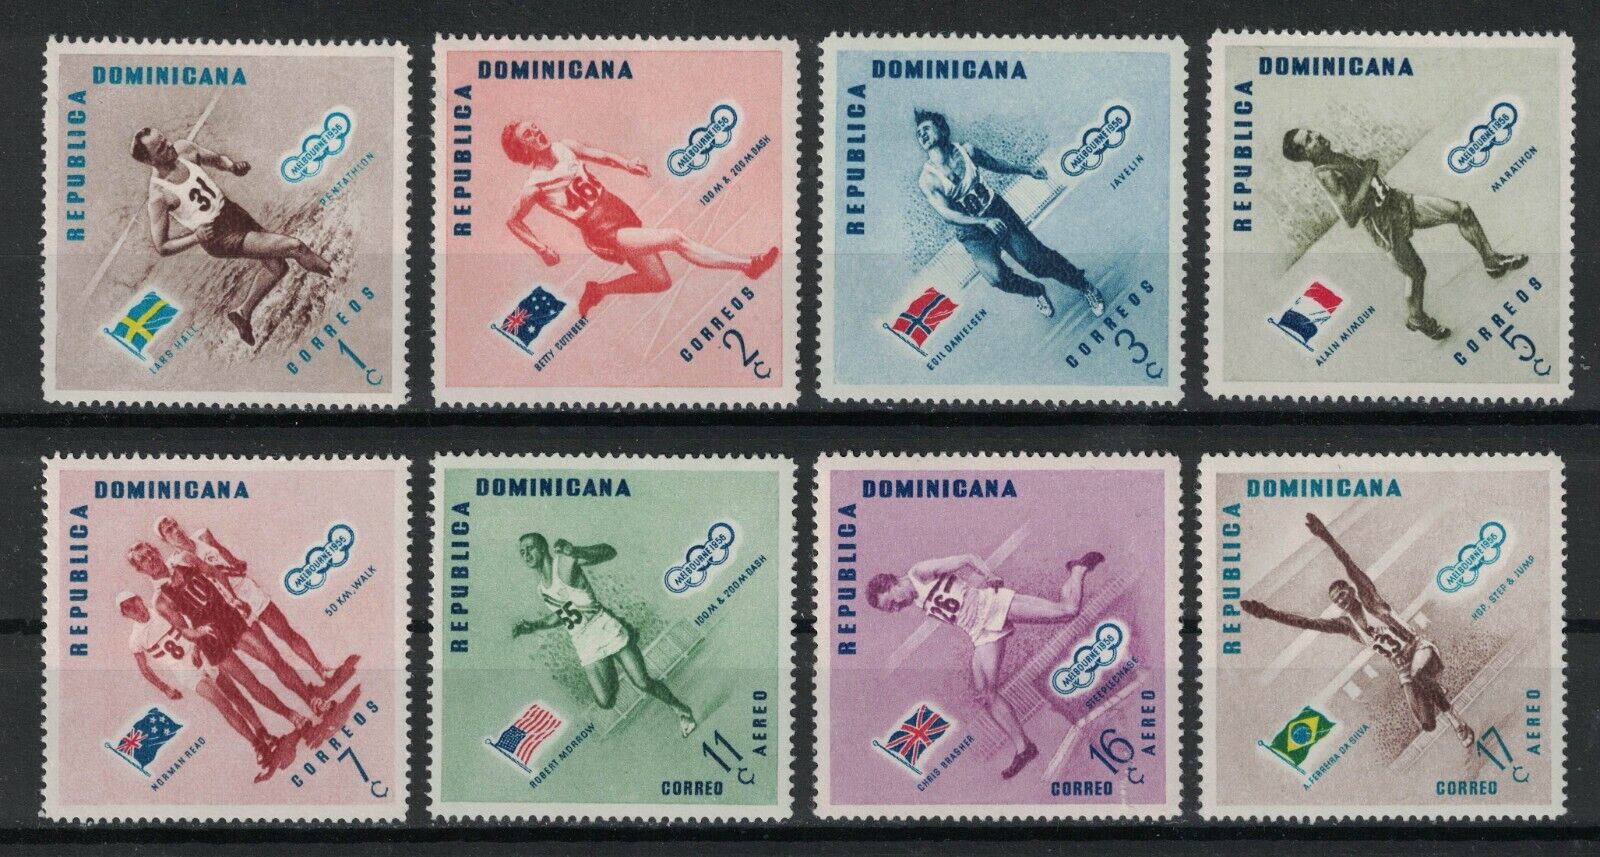 DOMINICAN Limited price sale REPUBLIC:1957 SC#479-83 Max 58% OFF MH winners R172 1956 Olympic